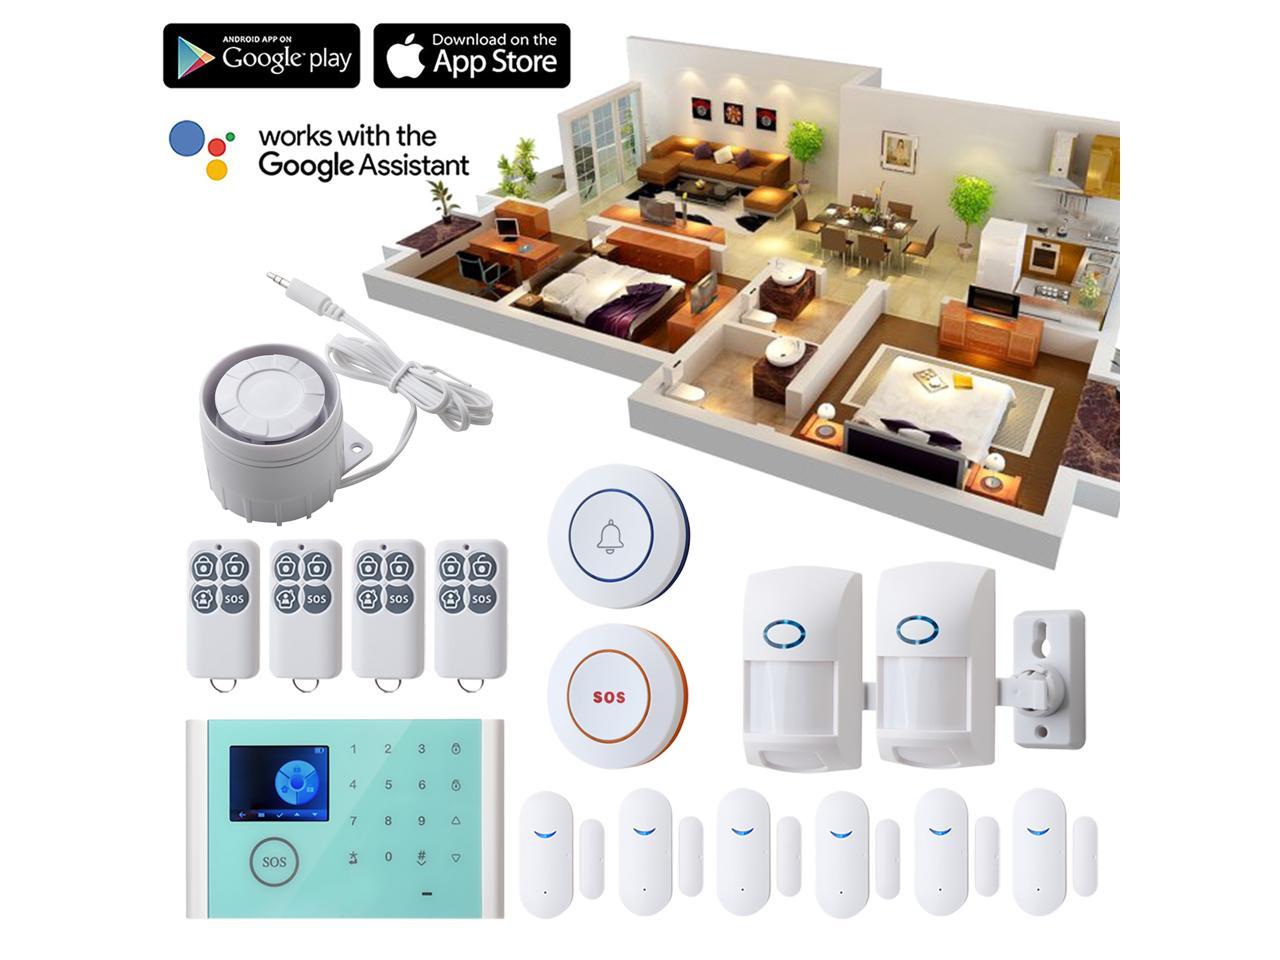 Details about   2.4" Wireless 3G/GSM+GPRS GSM WiFi Smart Security Alarm System Kit Home Burglar 